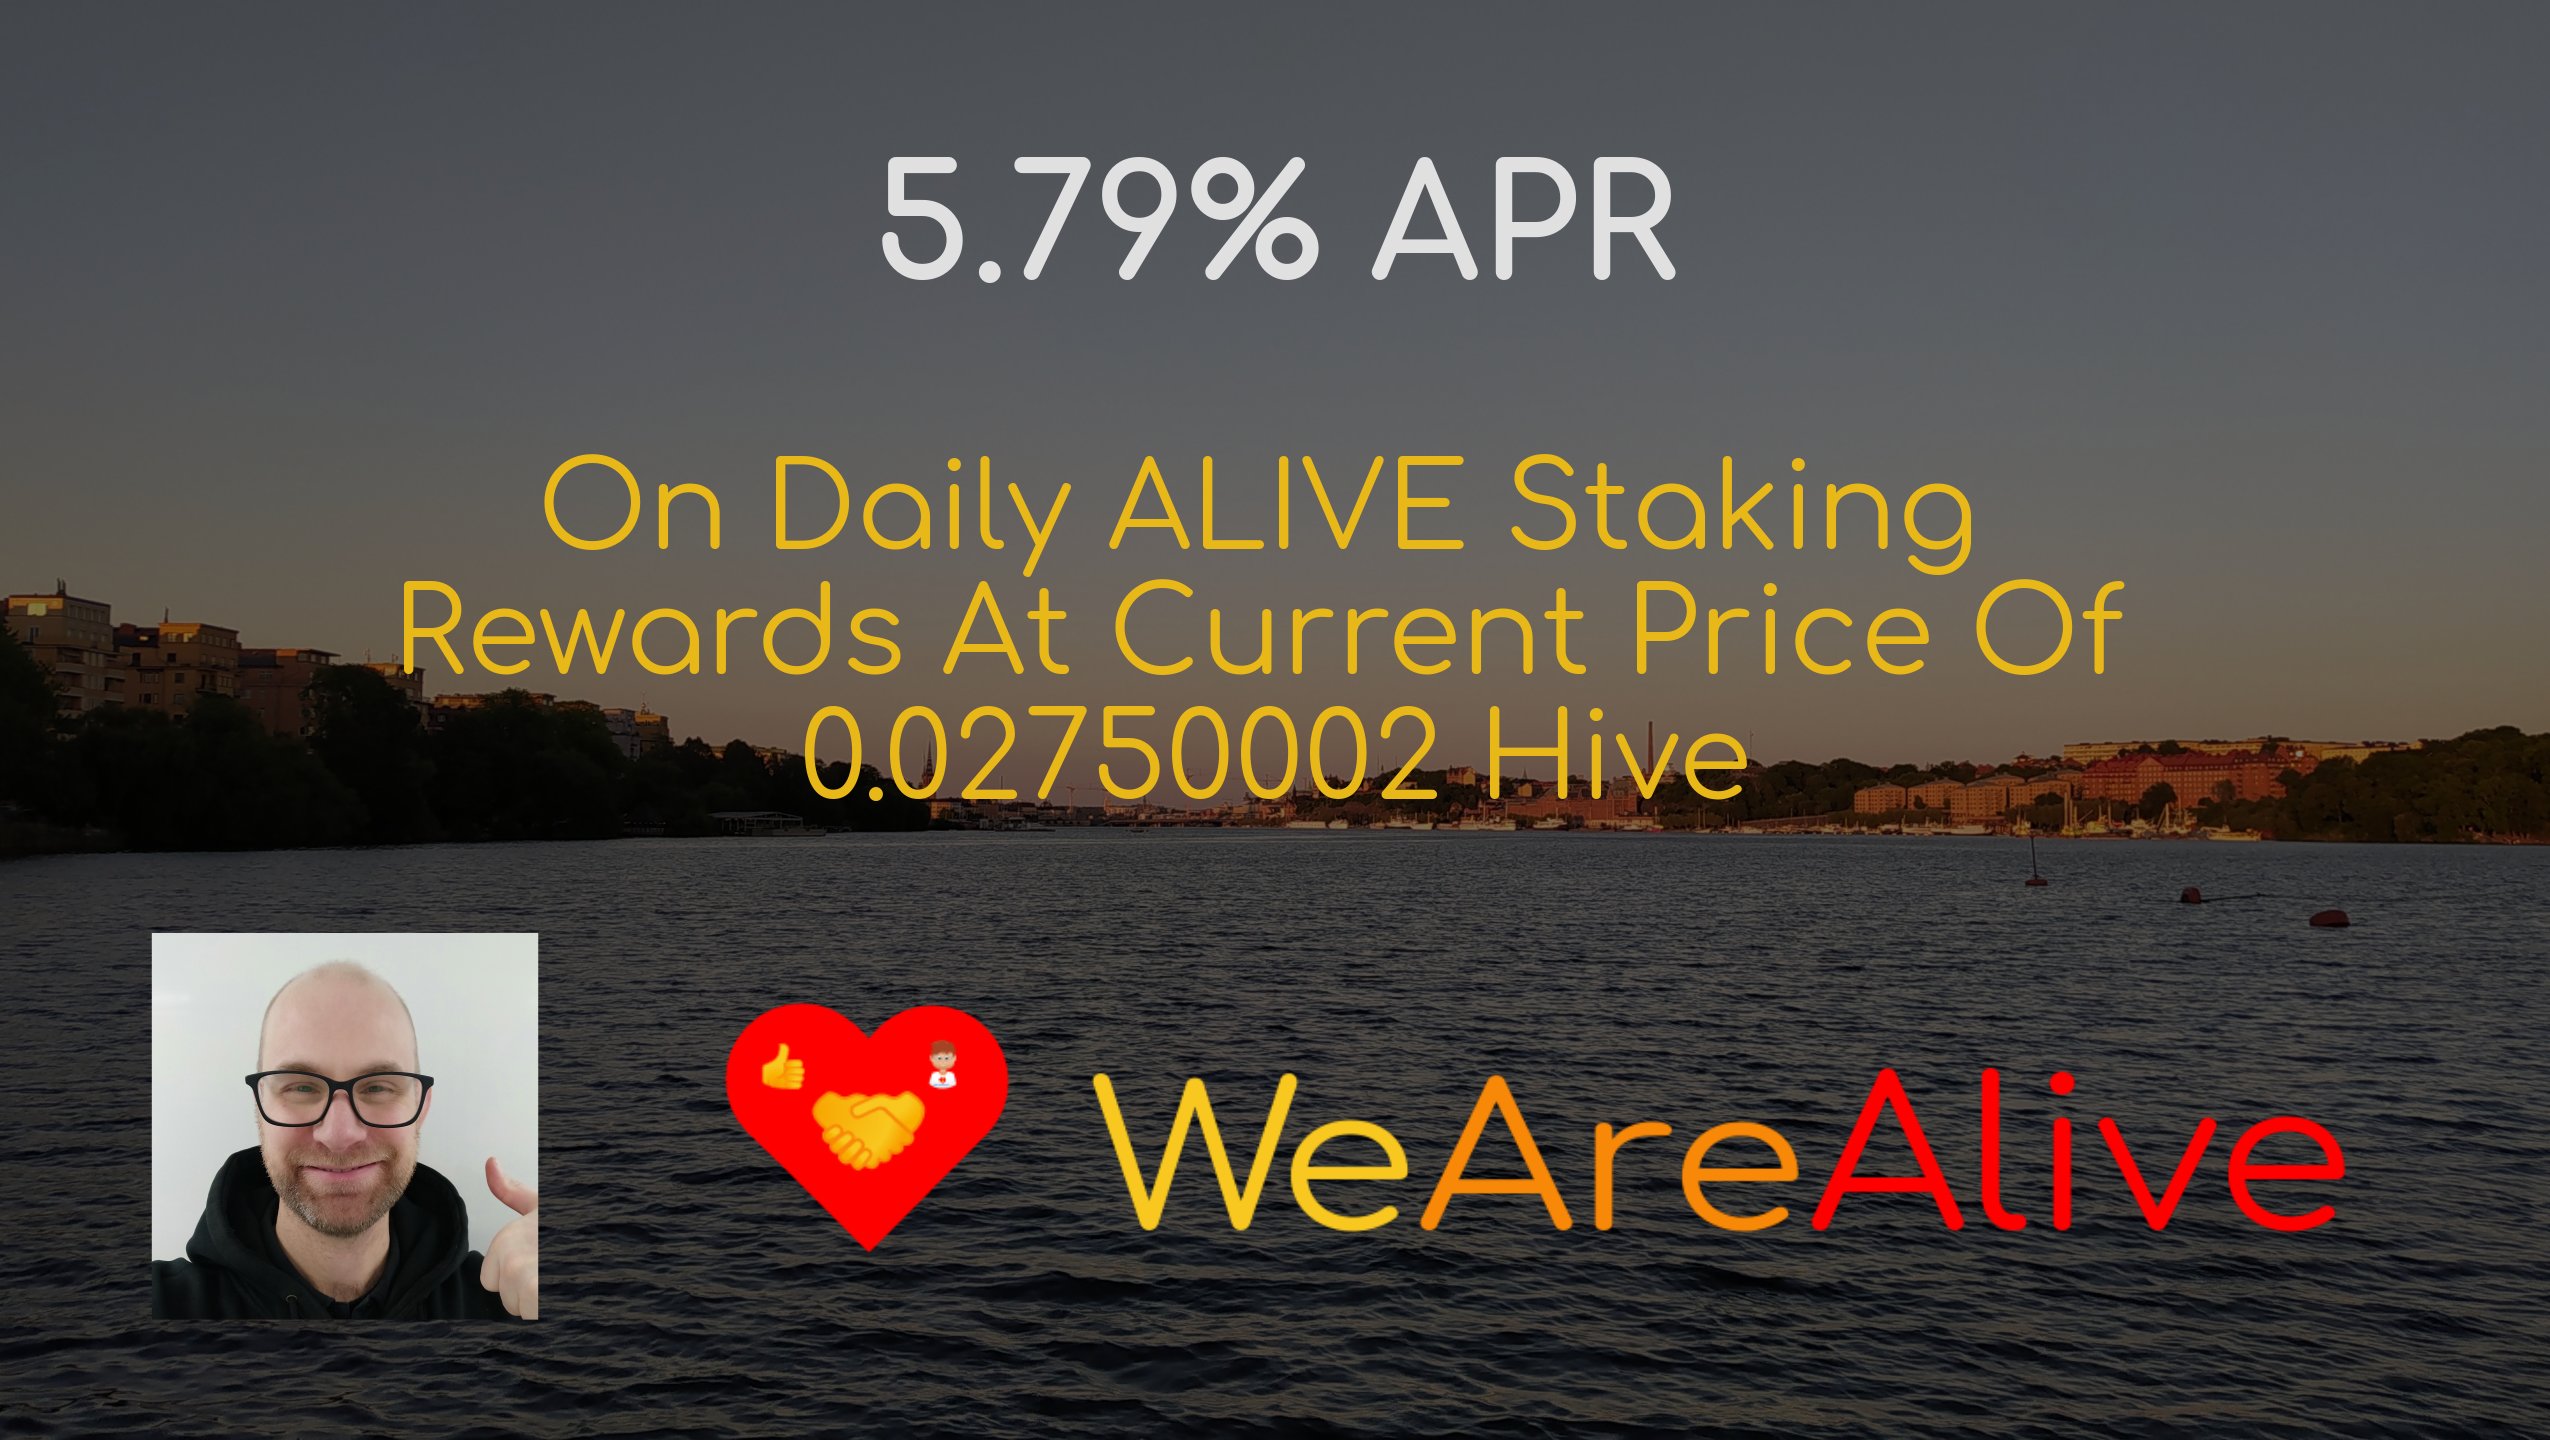 @flaxz/579percent-apr-on-daily-alive-staking-rewards-at-current-price-of-002750002-hive